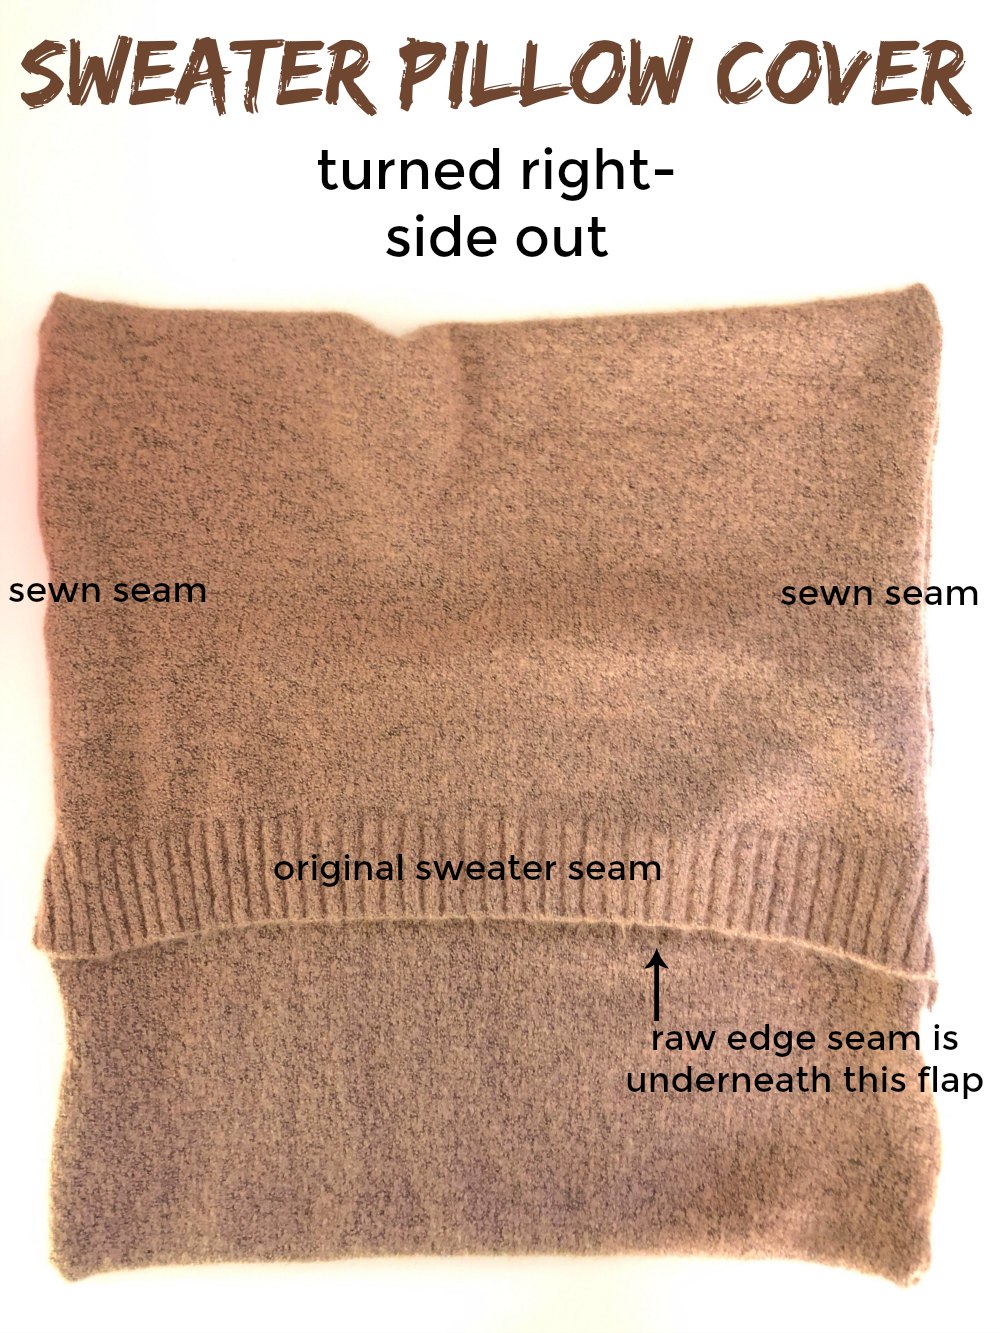 Sweater Pillow Cover tutorial showing where the sewn seams are 